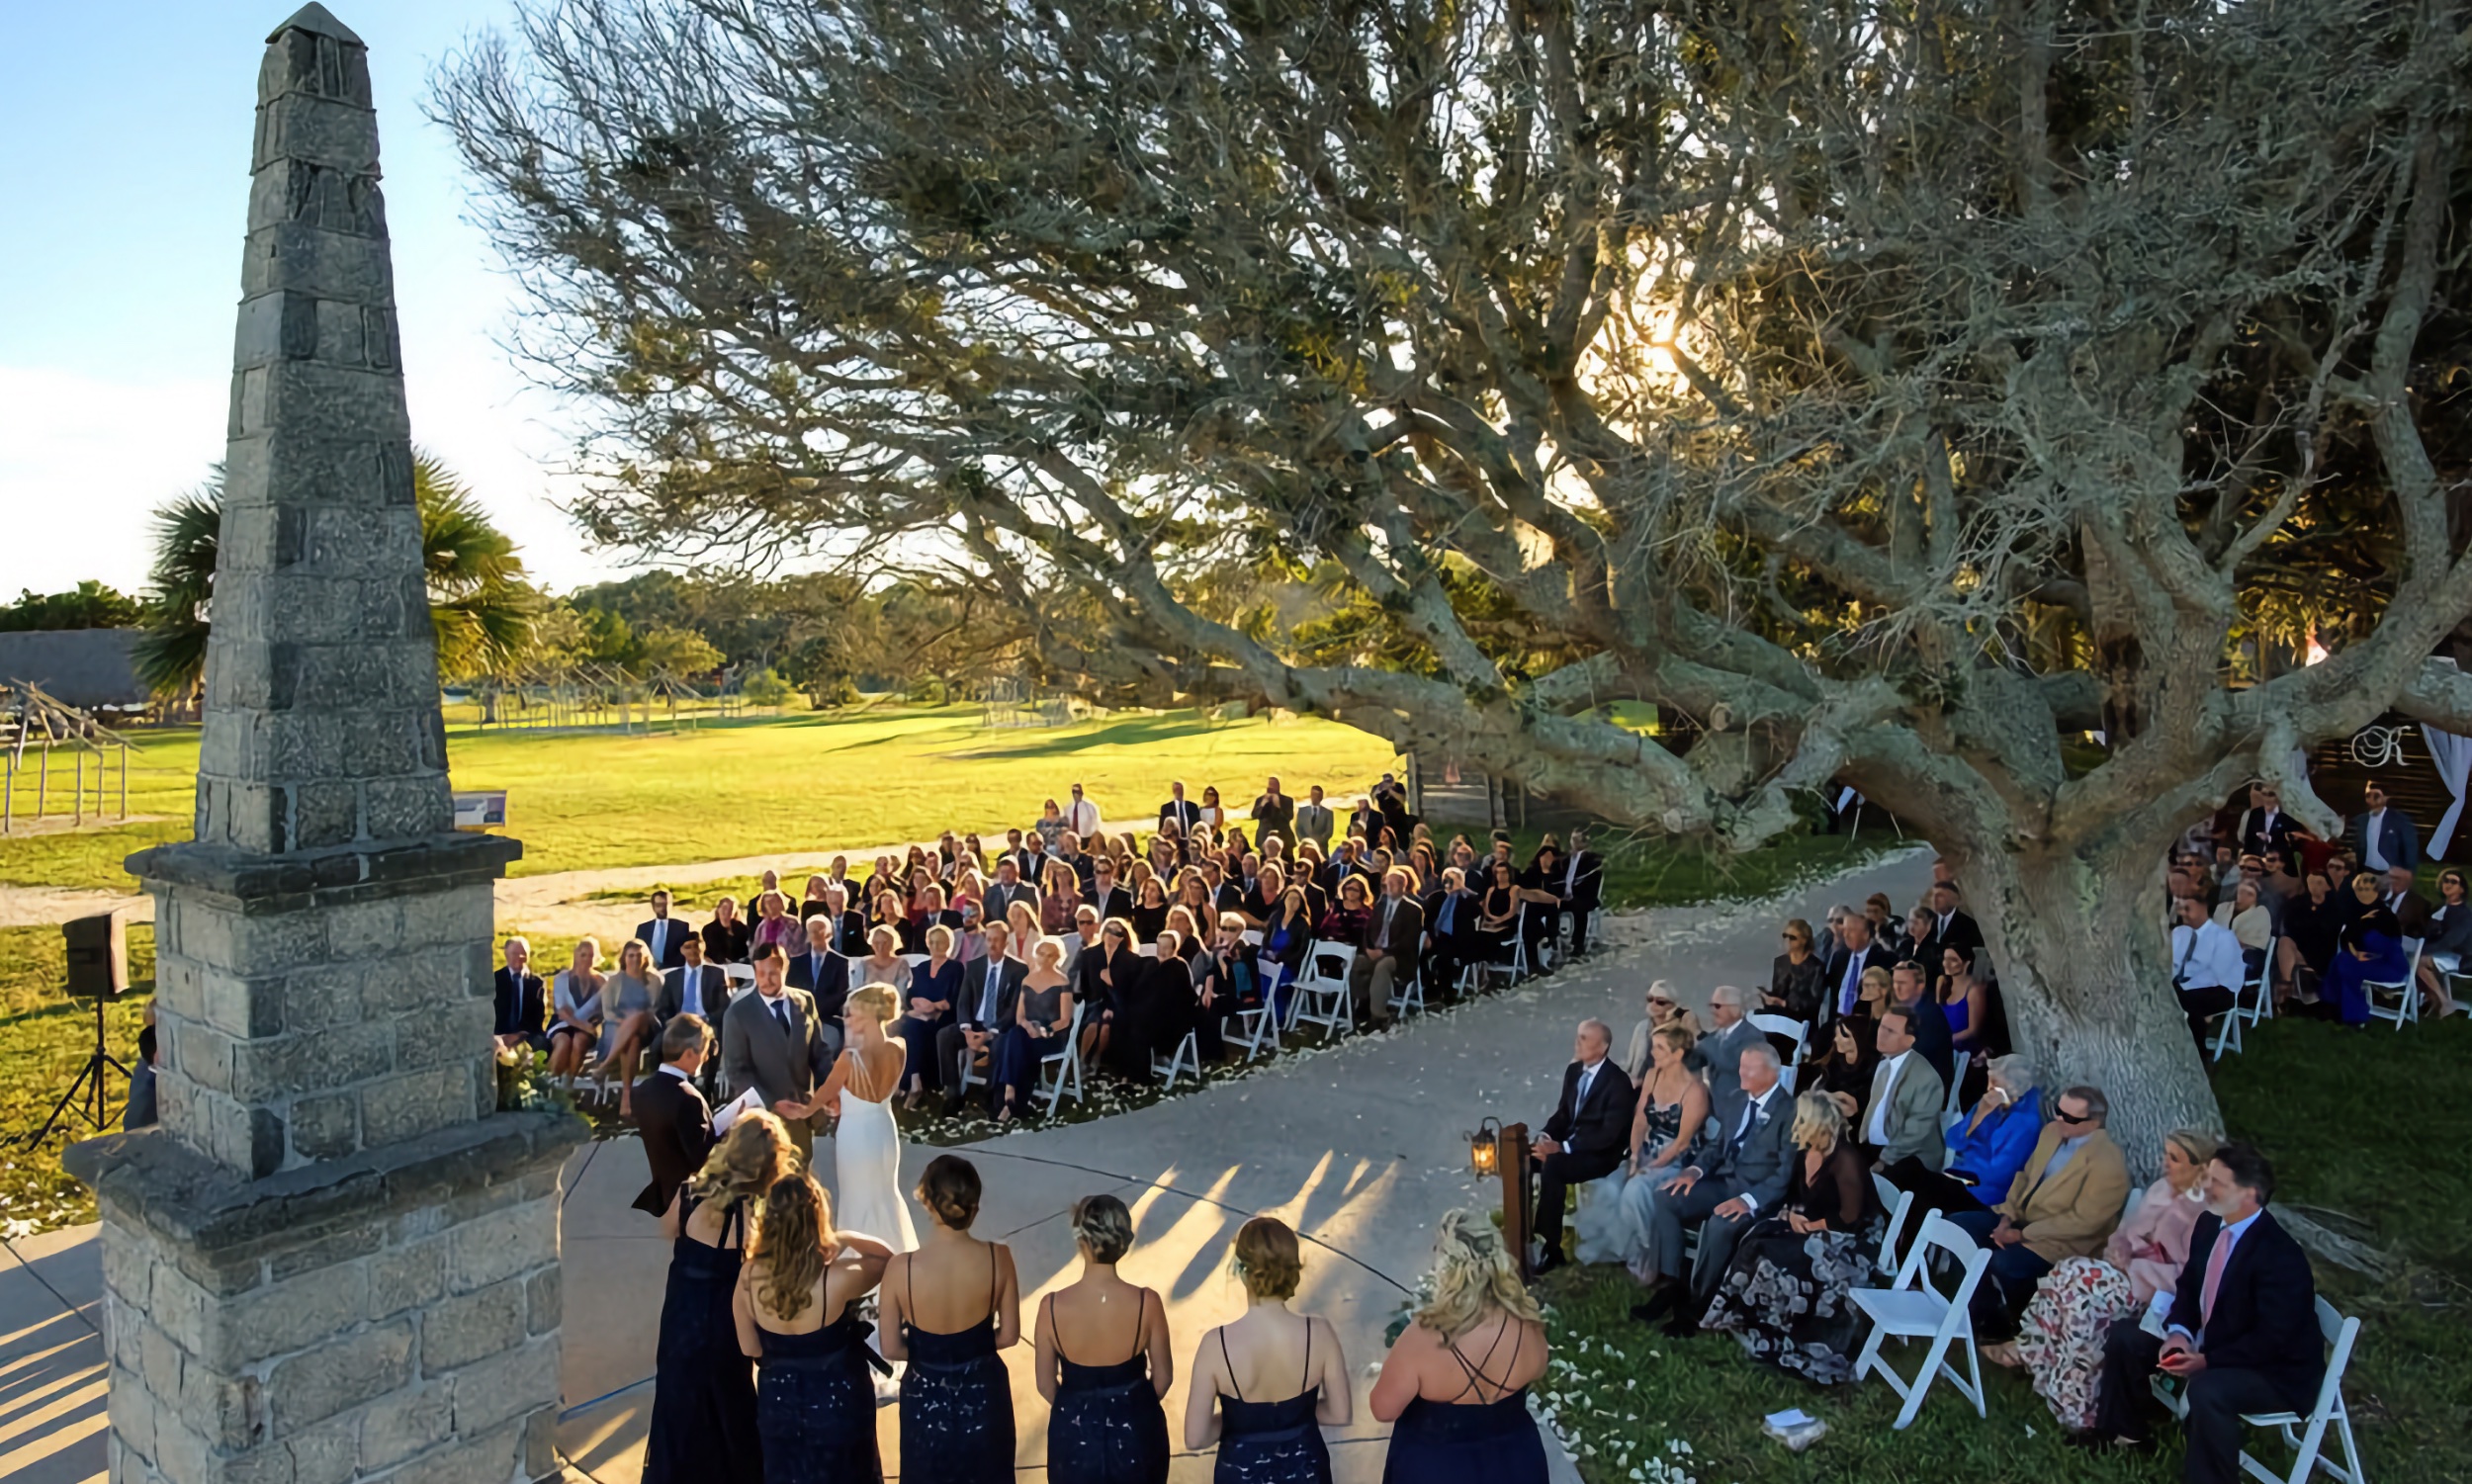 Beneath the branches of a live oak tree and a coquina obelisk, a couple ties the knot at the Fountain of Youth. The audience is seated in chairs on the grass around them.